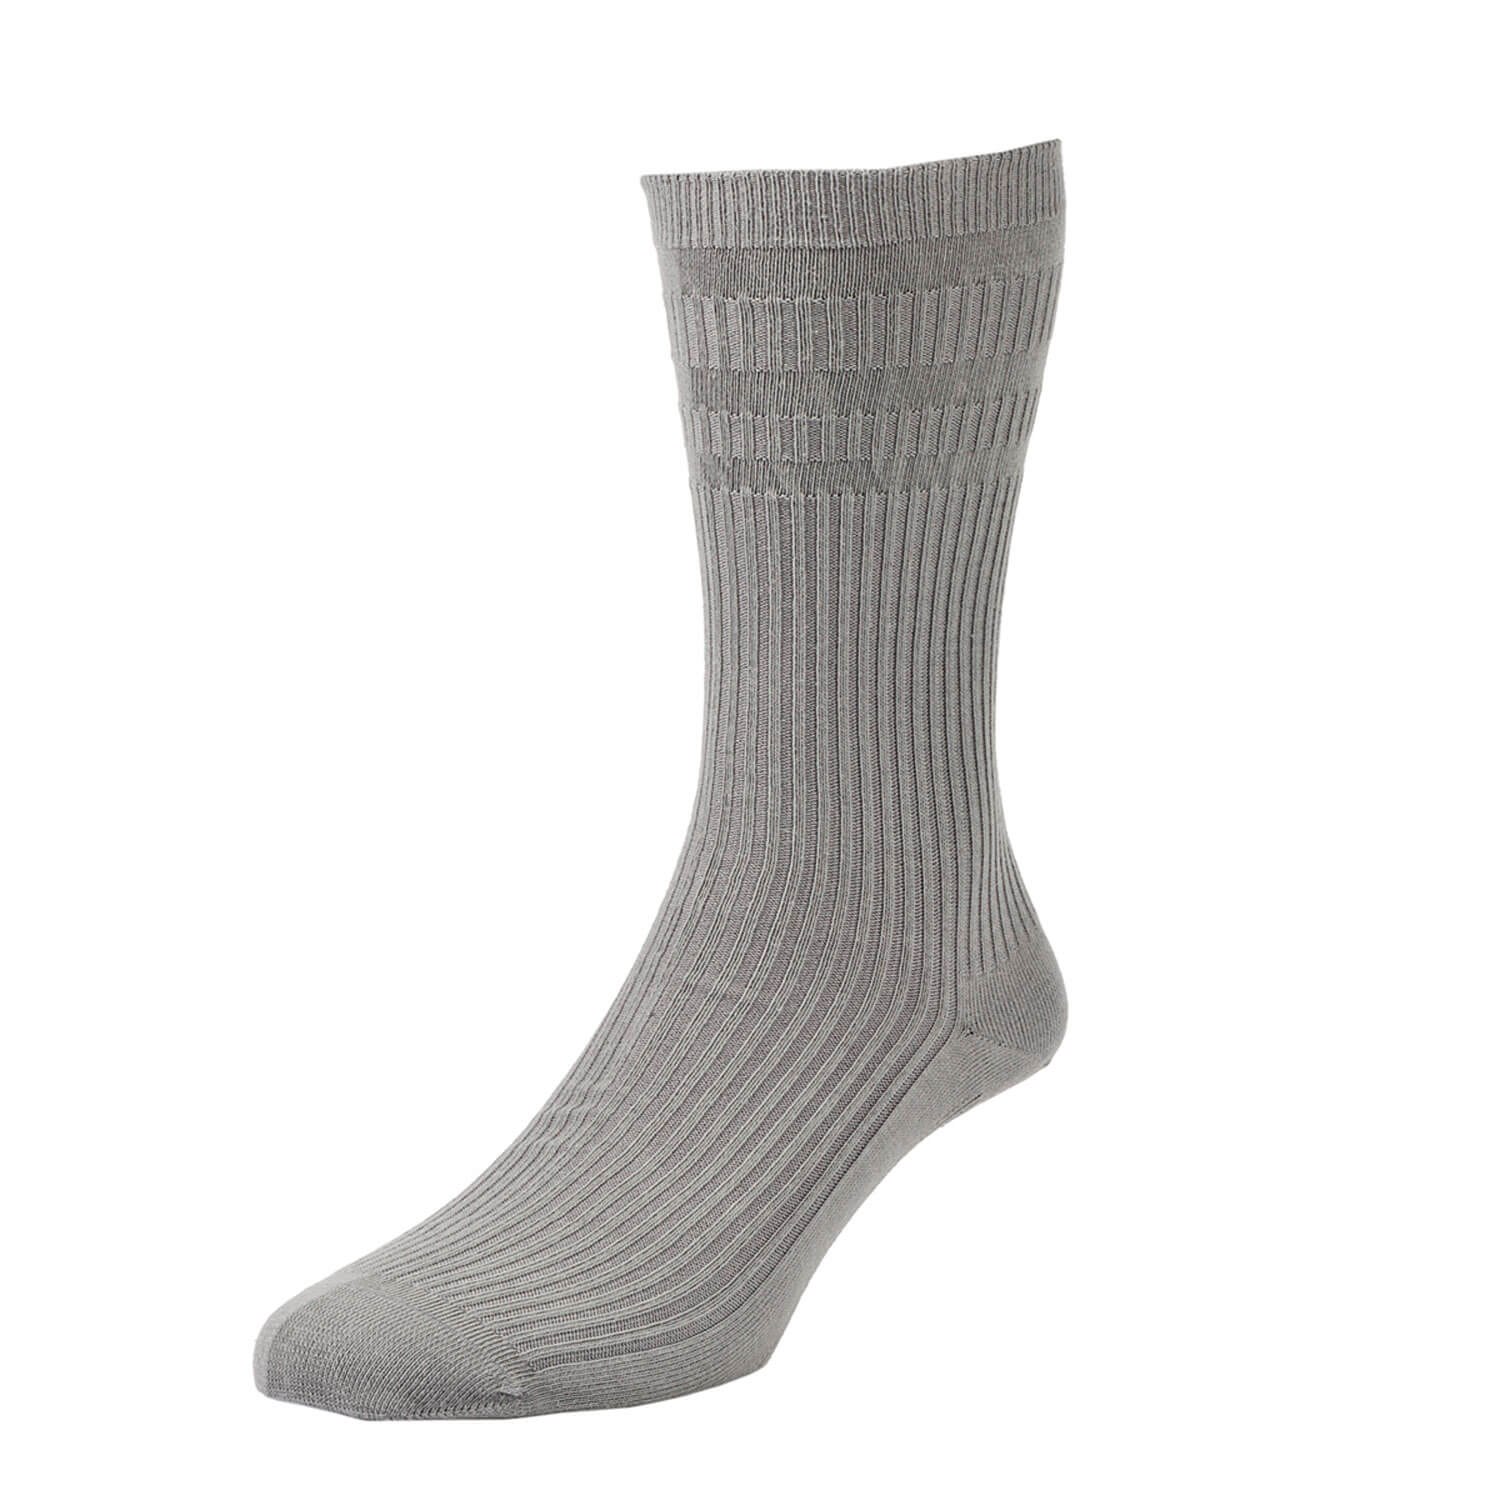 Hj Hall Softop Cotton Rich Diabetic Socks- Grey 1 Shaws Department Stores